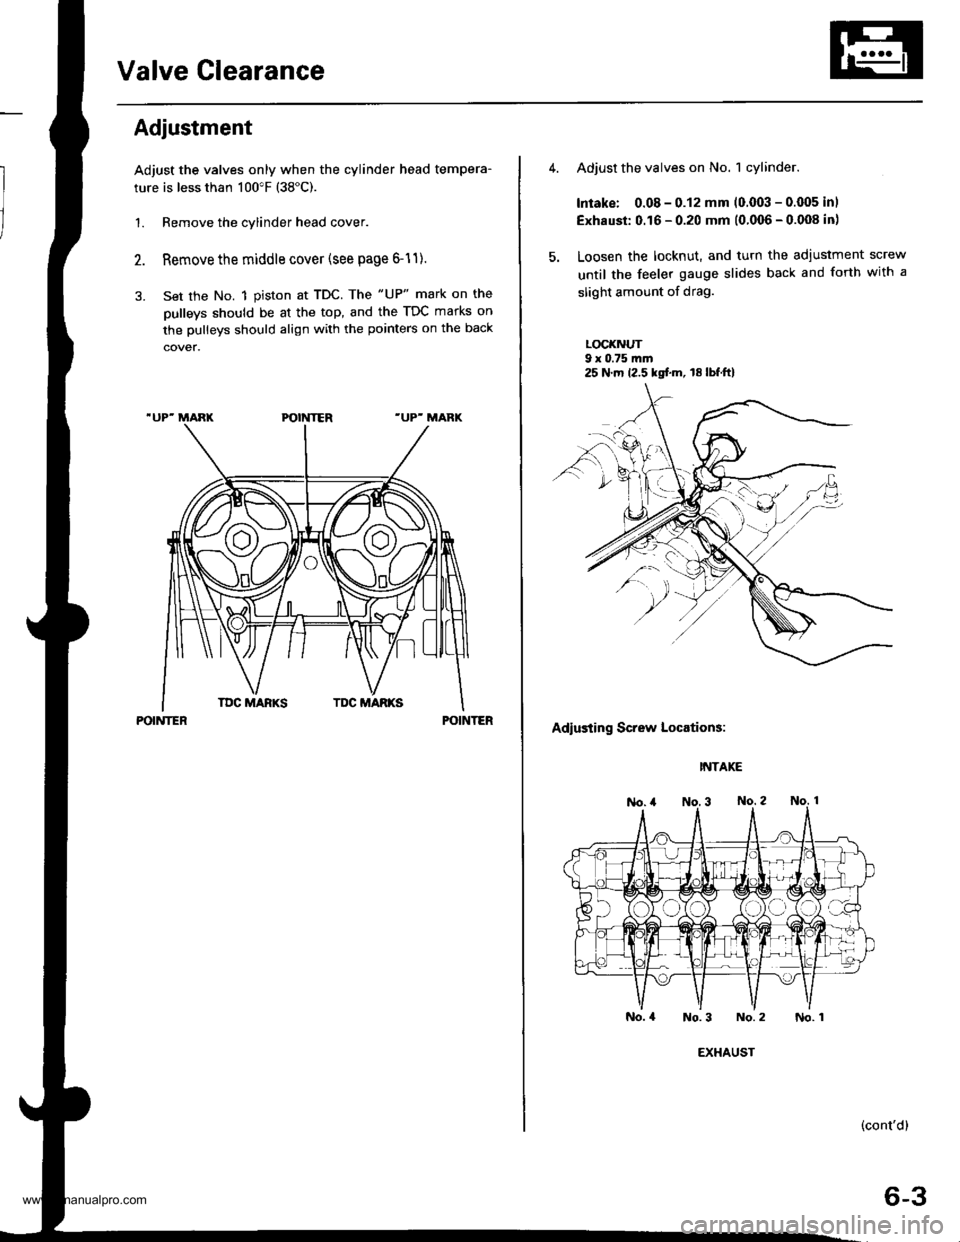 HONDA CR-V 1999 RD1-RD3 / 1.G Workshop Manual 
Valve Clearance
Adiustment
Adjust the valves only when the cylinder head tempera-
ture is less than 100"F (38"C).
1. Remove the cylinder head cover.
Remove the middle cover (see page 6-11).
Set the N